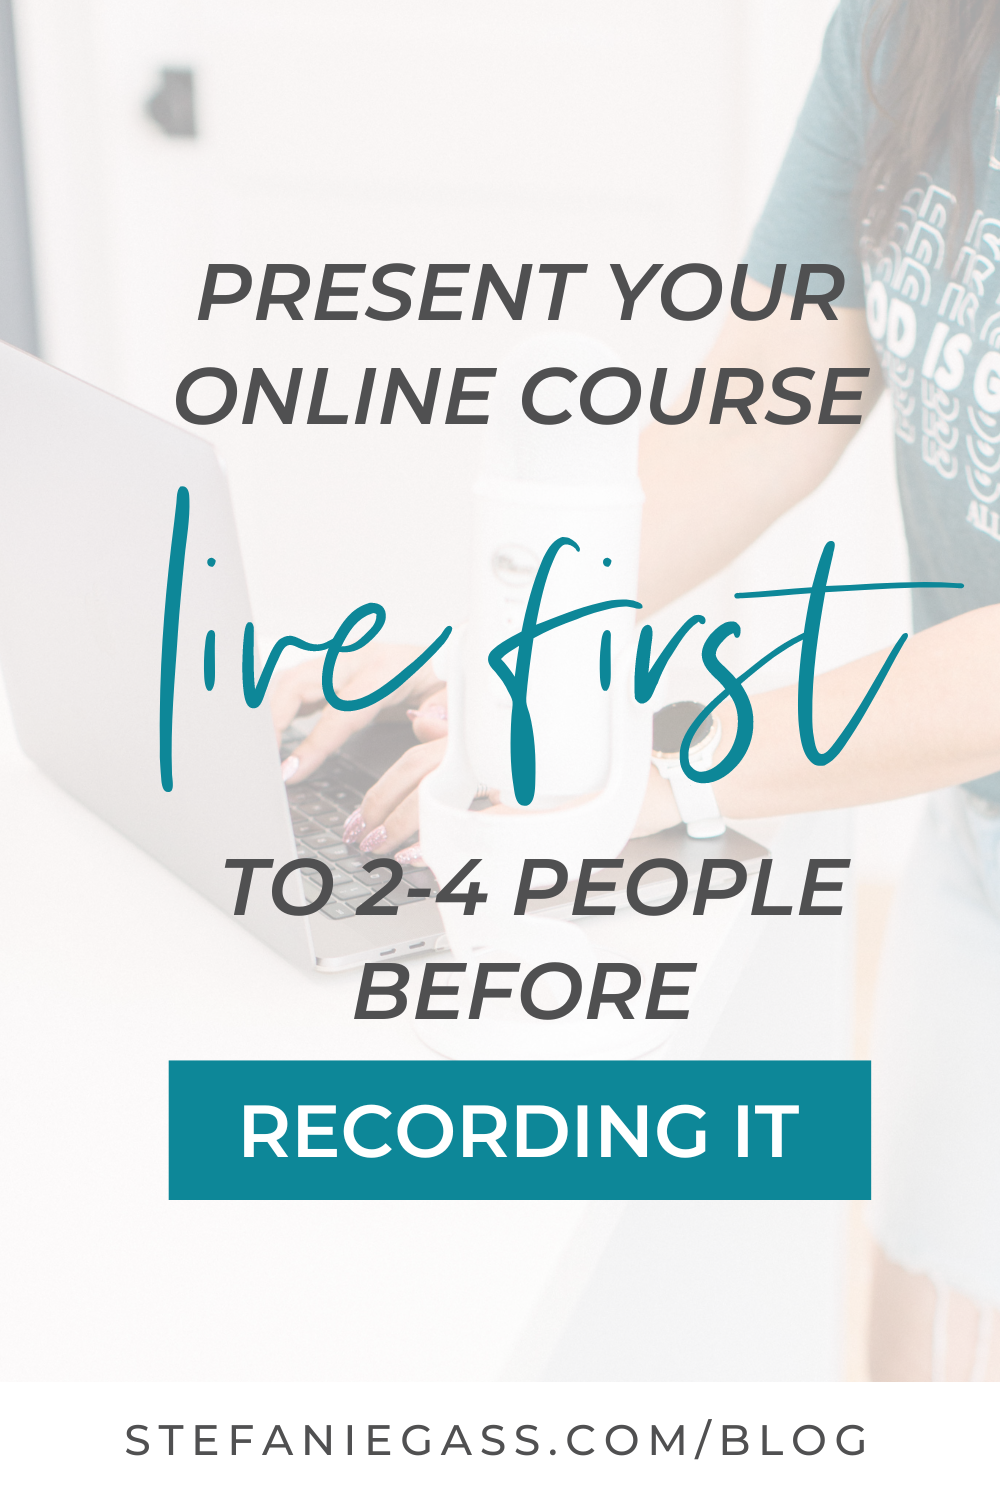 Text Reads:  Present your online course live first to 2-4 people before recording it. Stefanie Gass.com Blog